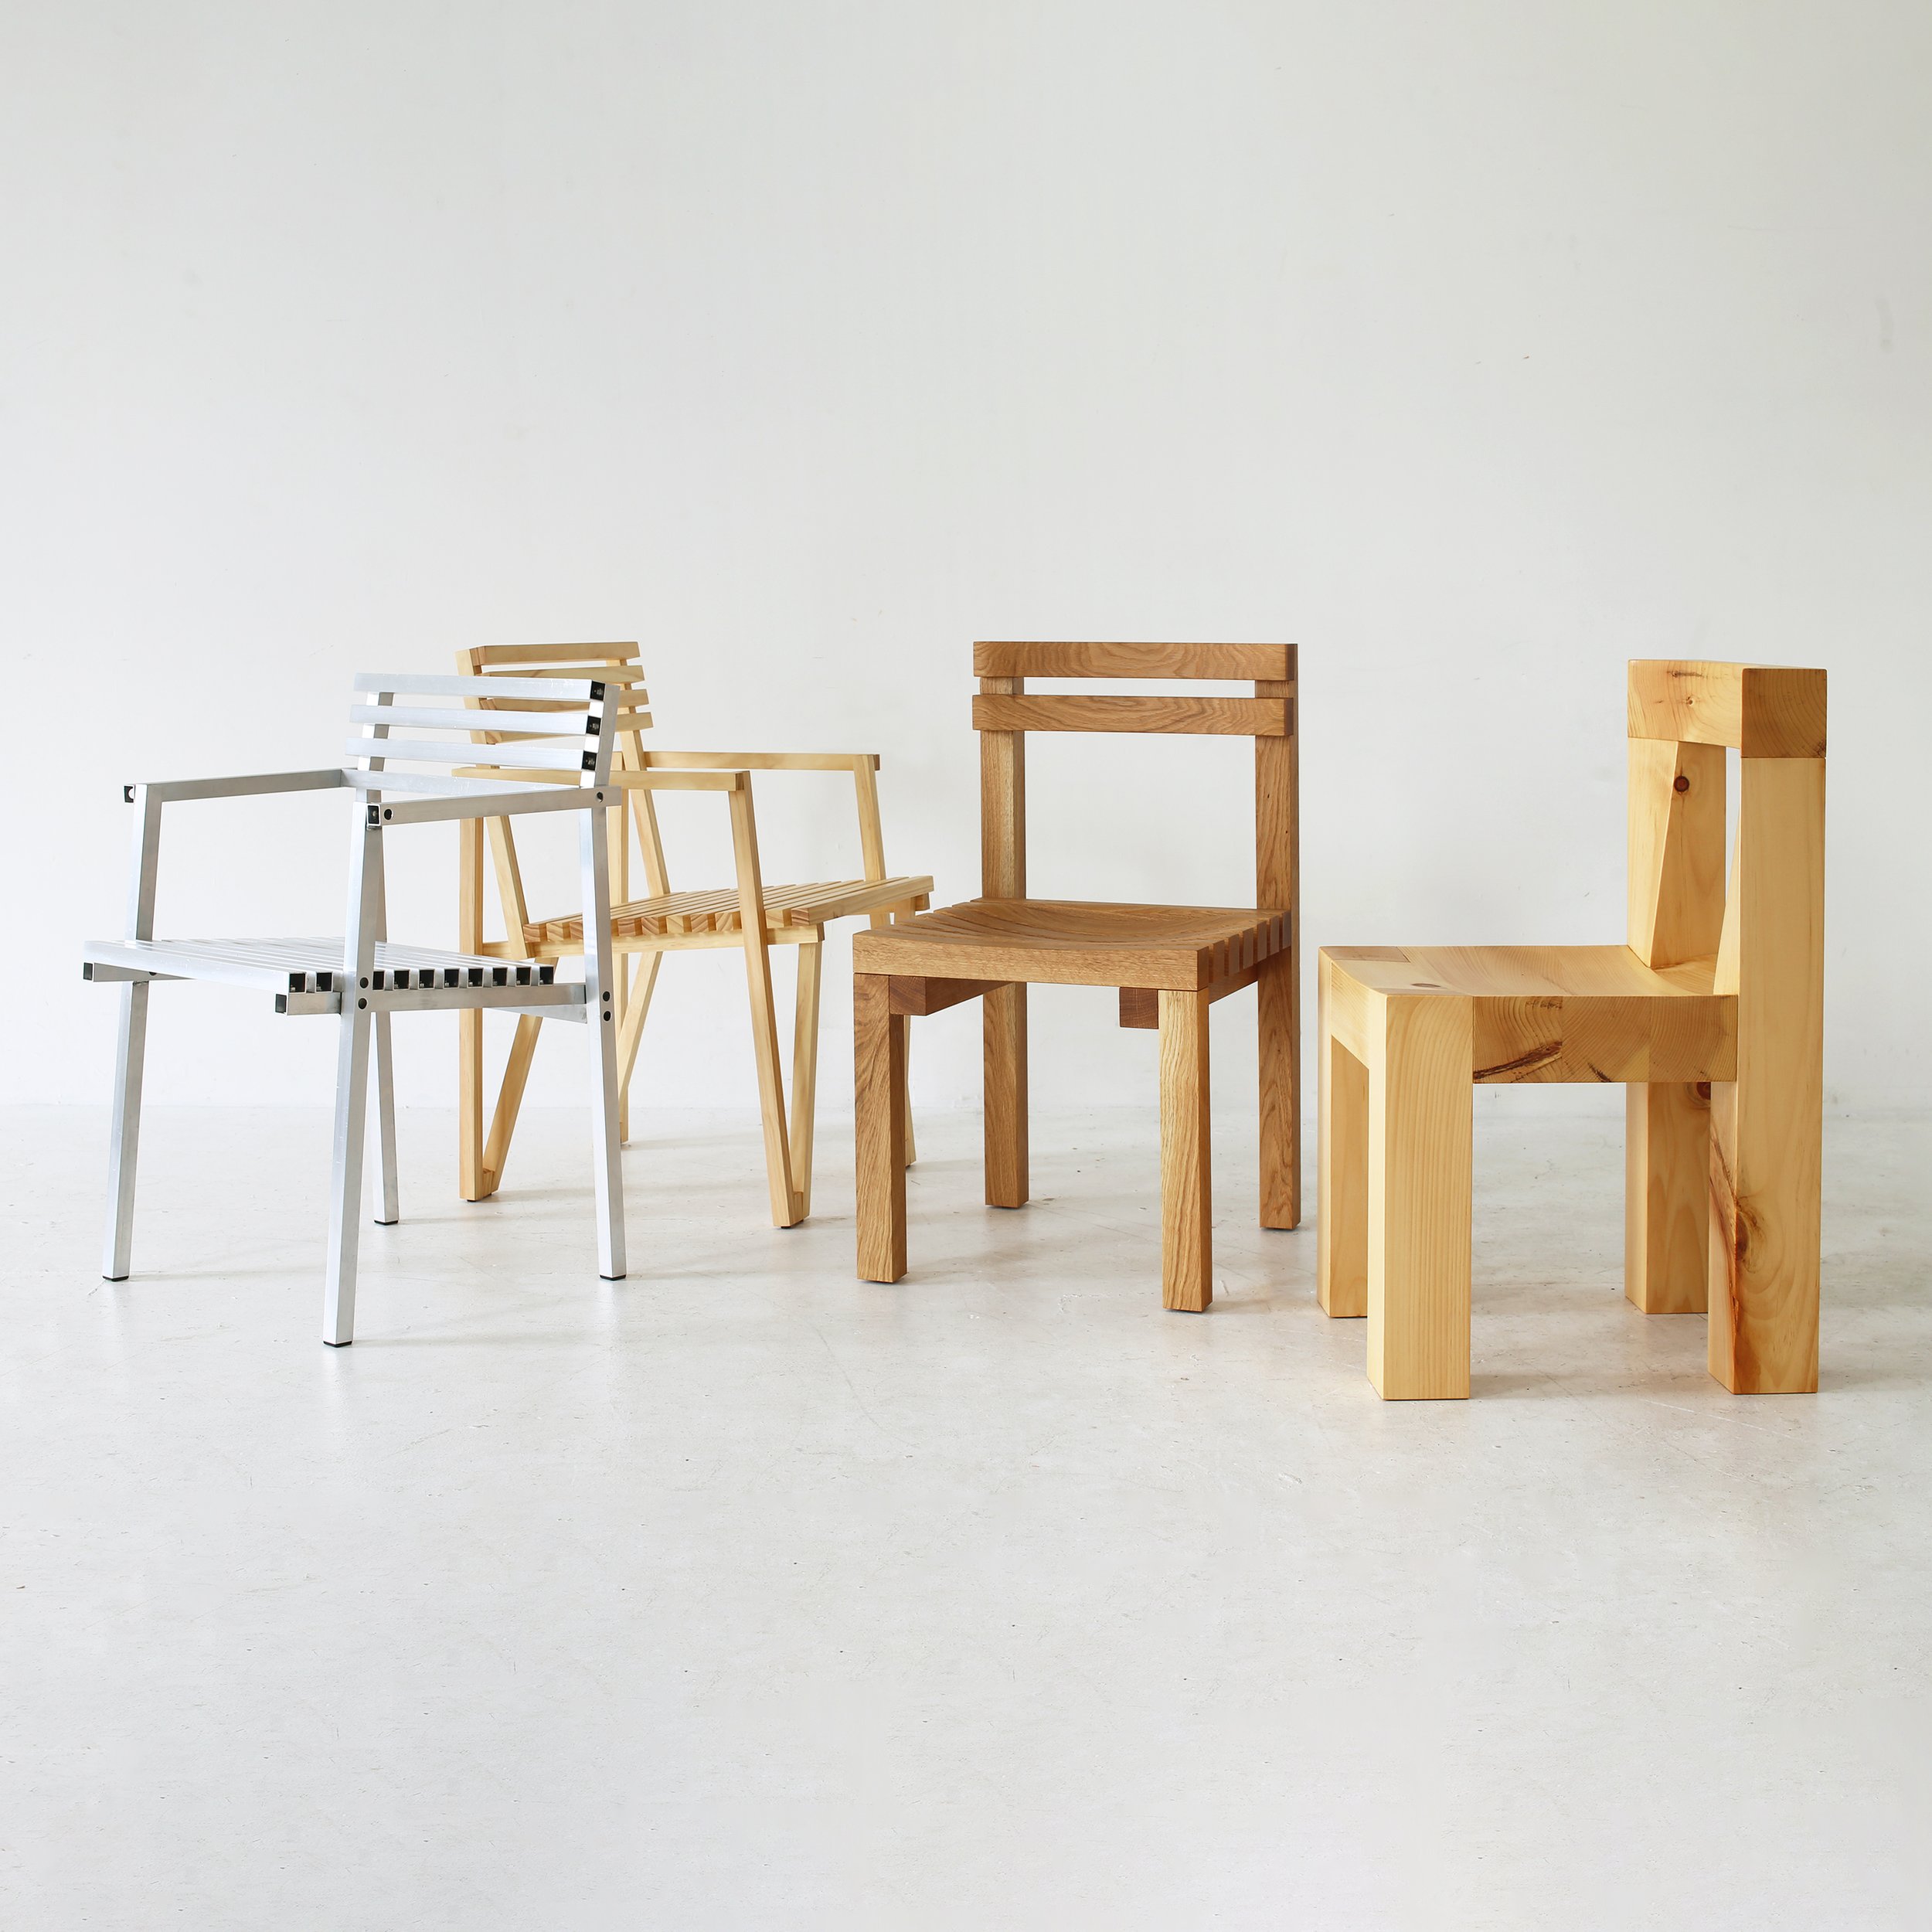 Four Chairs copy square.jpg